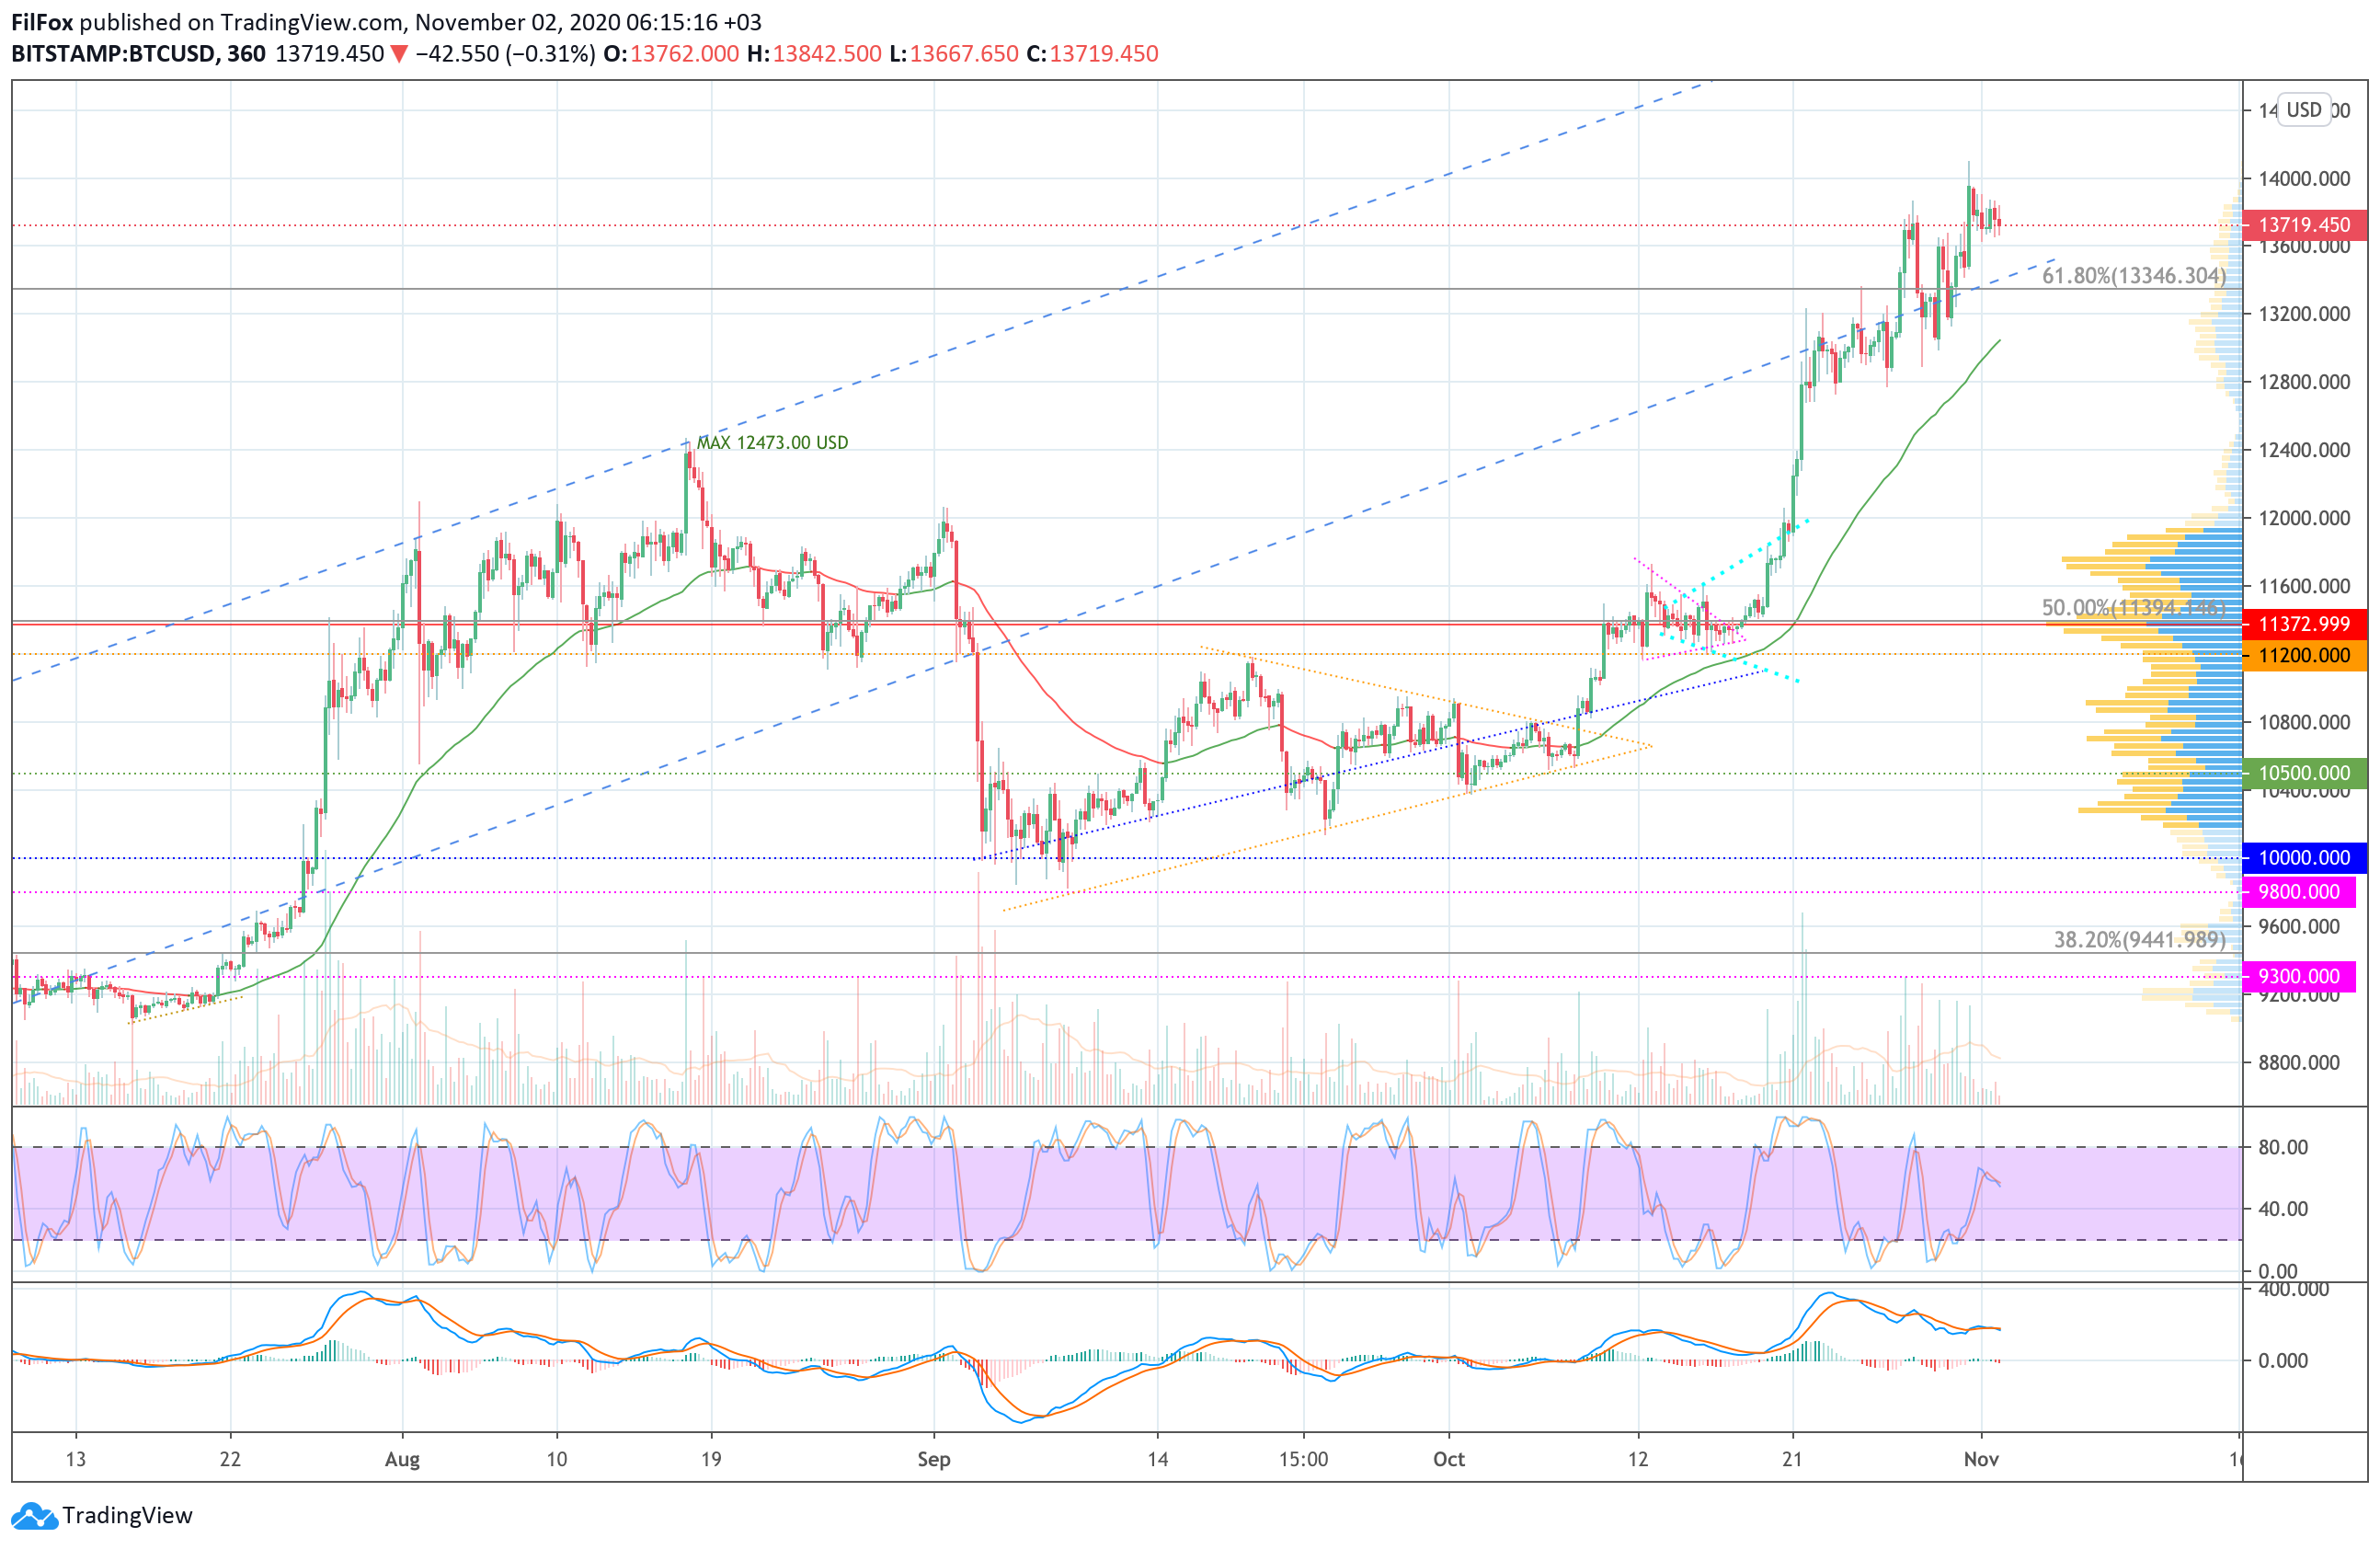 Analysis of prices for Bitcoin, Ethereum, Ripple for 11/02/2020